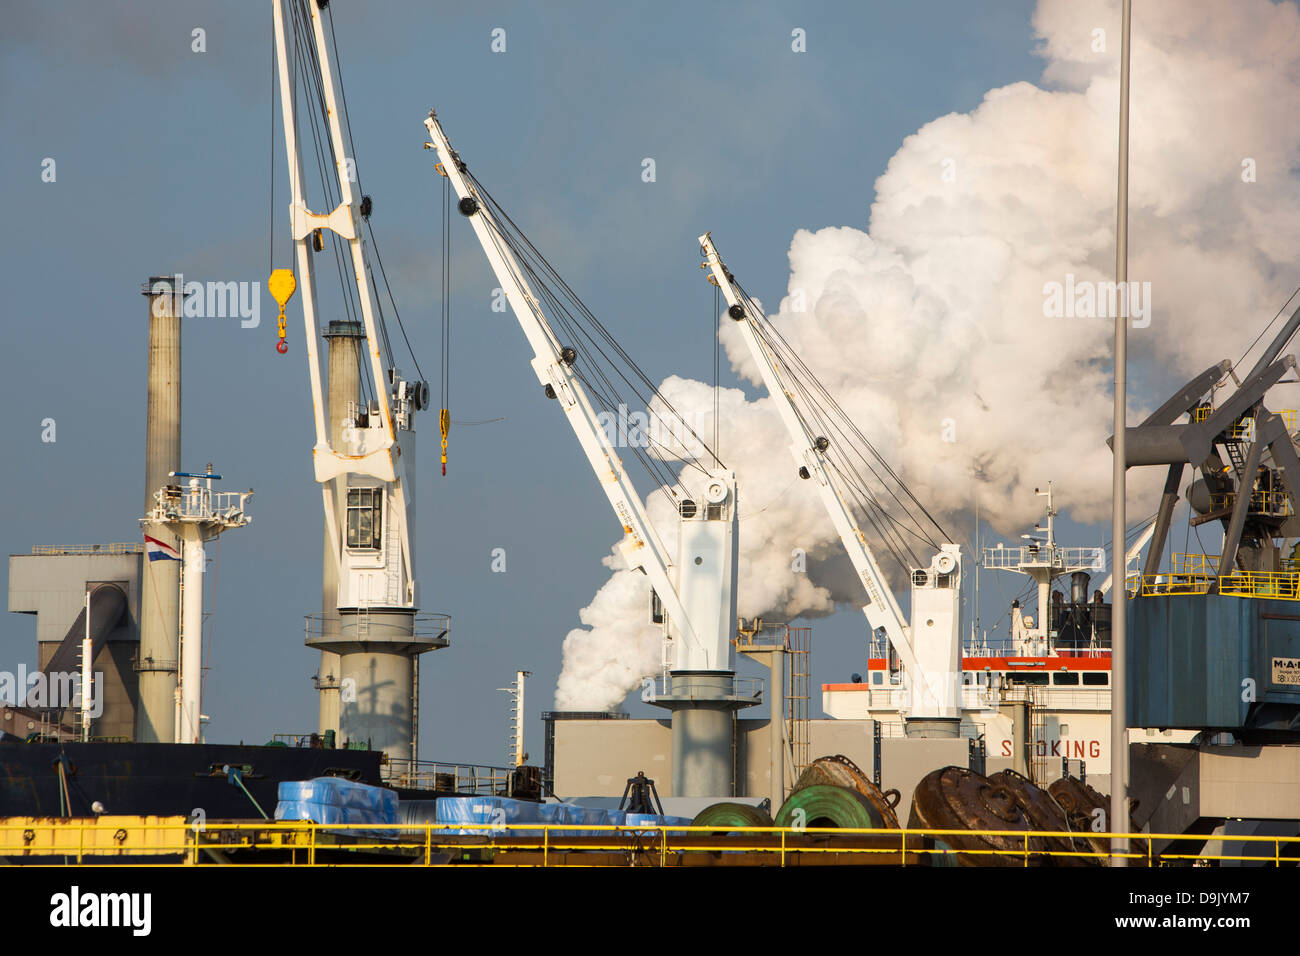 Emissions from the Ijmuiden, Tata steel works, Netherlands at sunset. Stock Photo